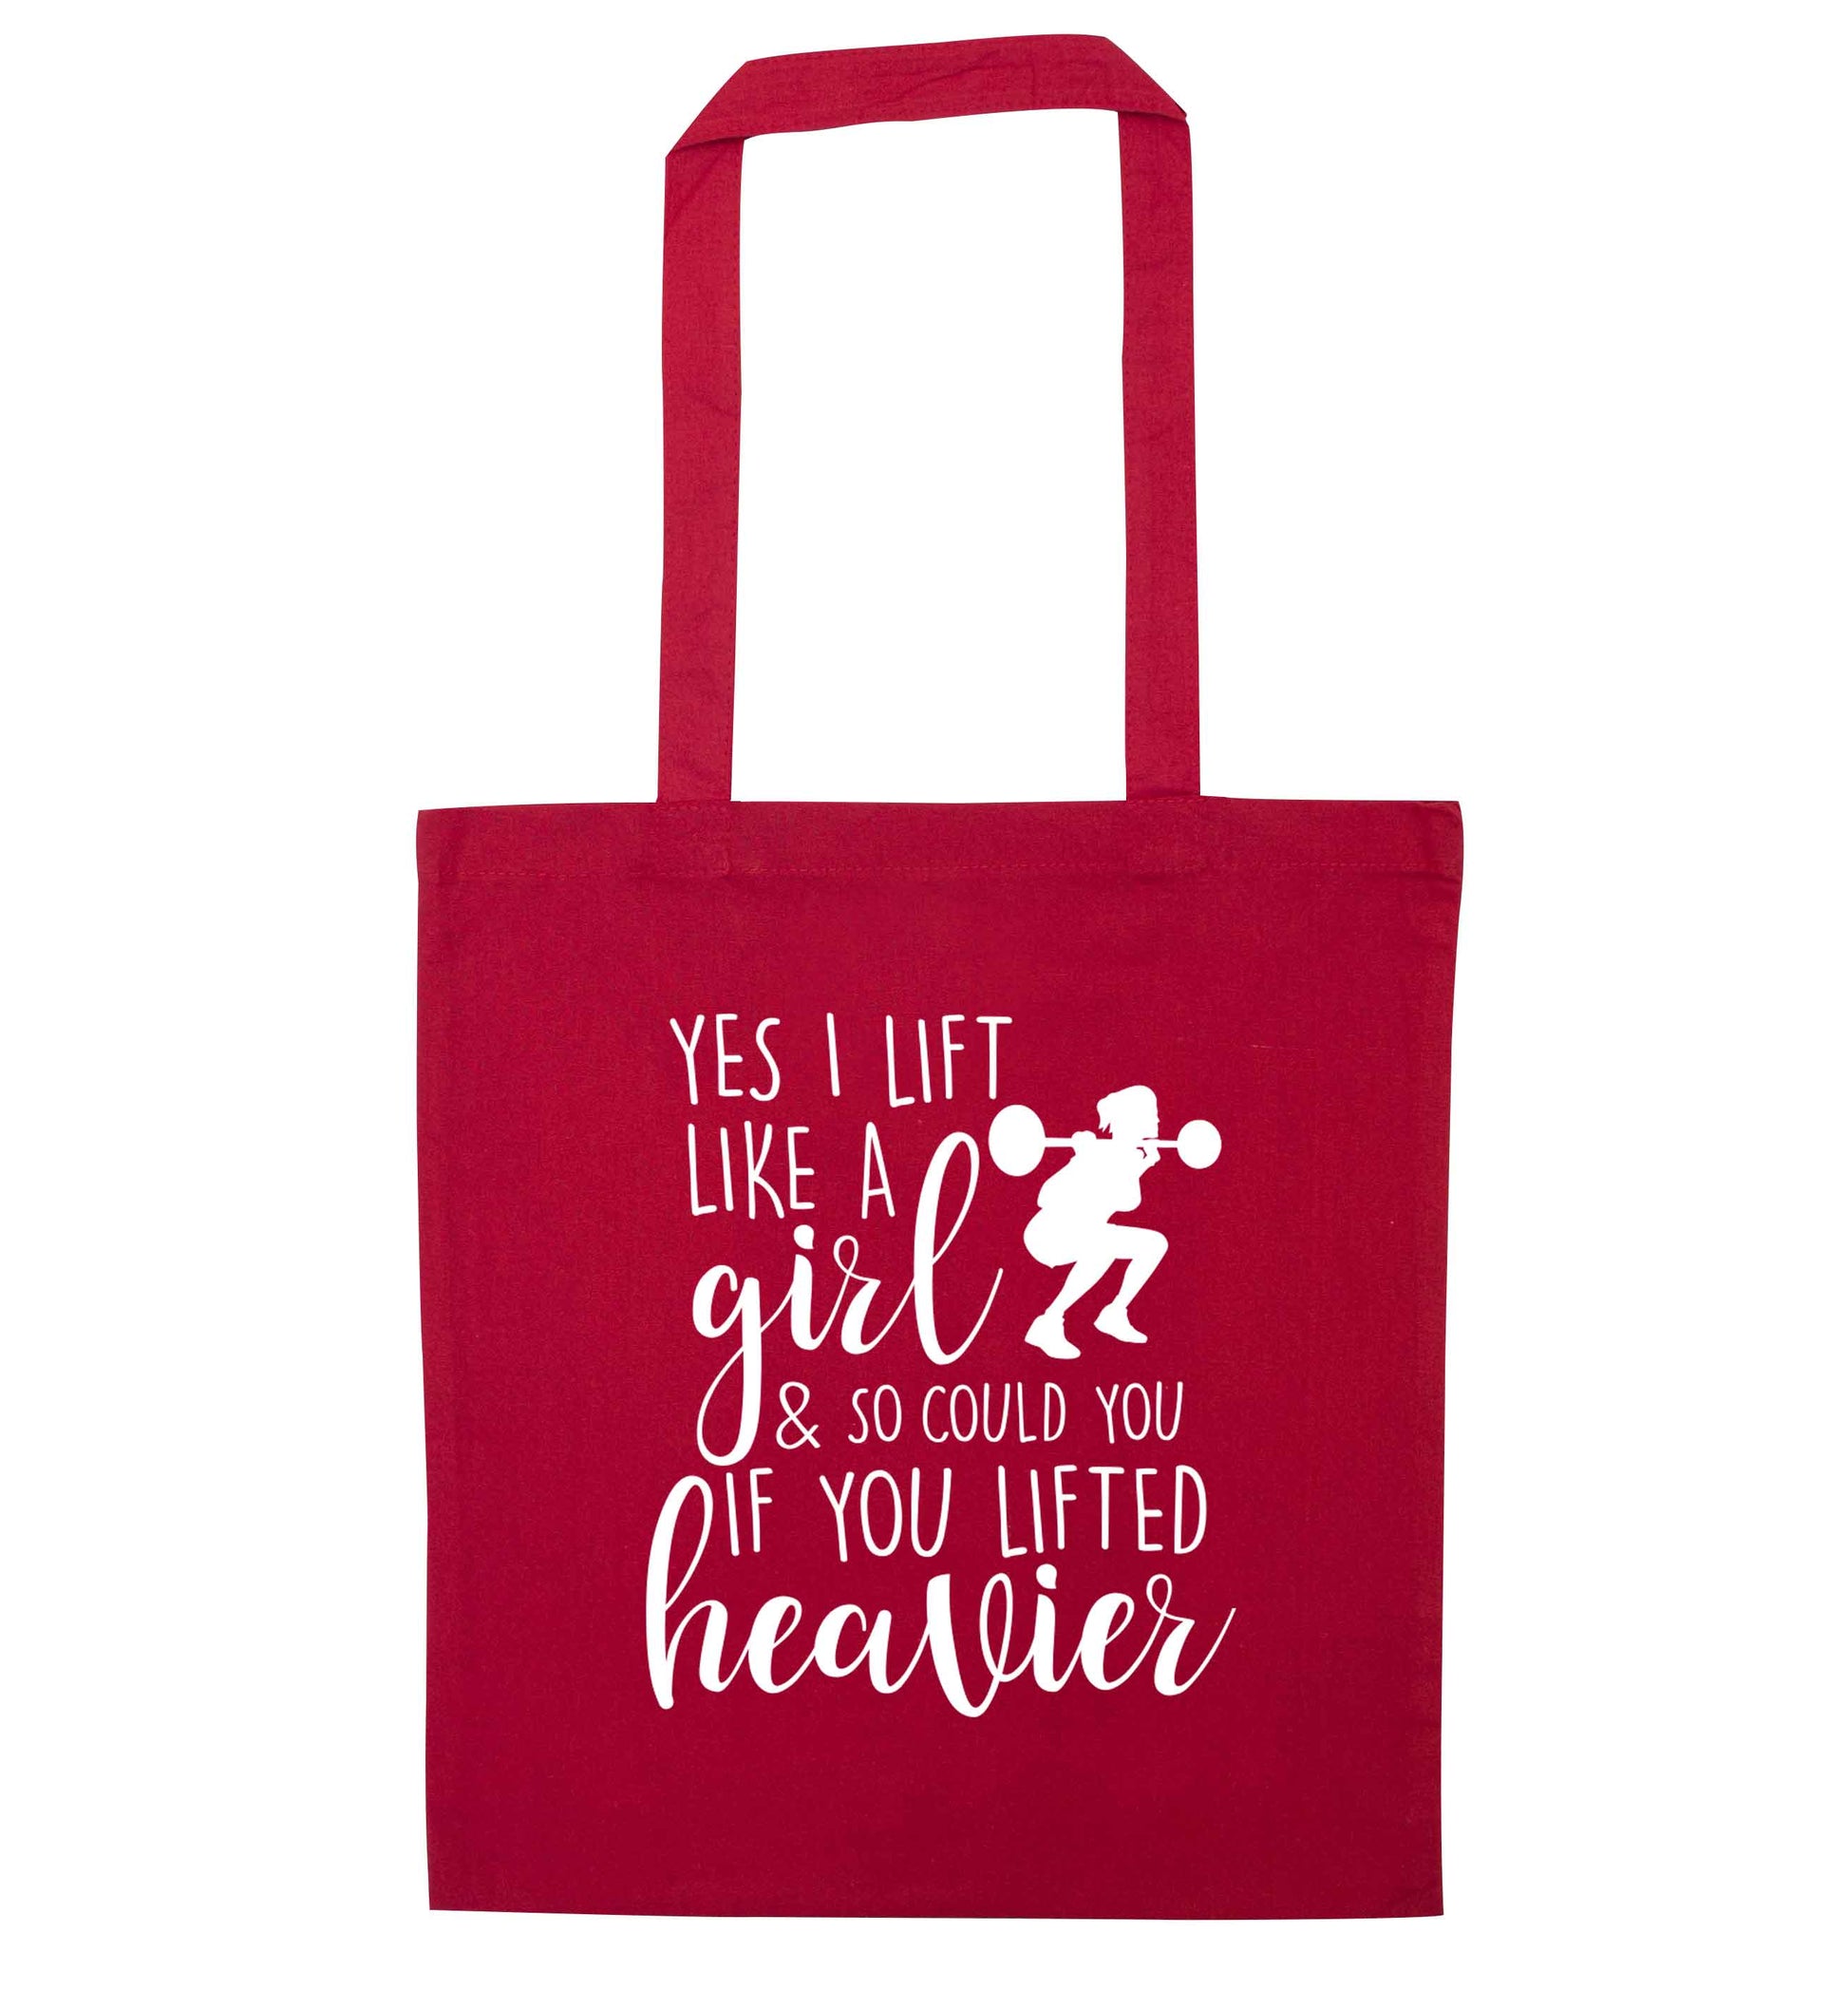 Yes I lift like a girl and so could you if you lifted heavier red tote bag